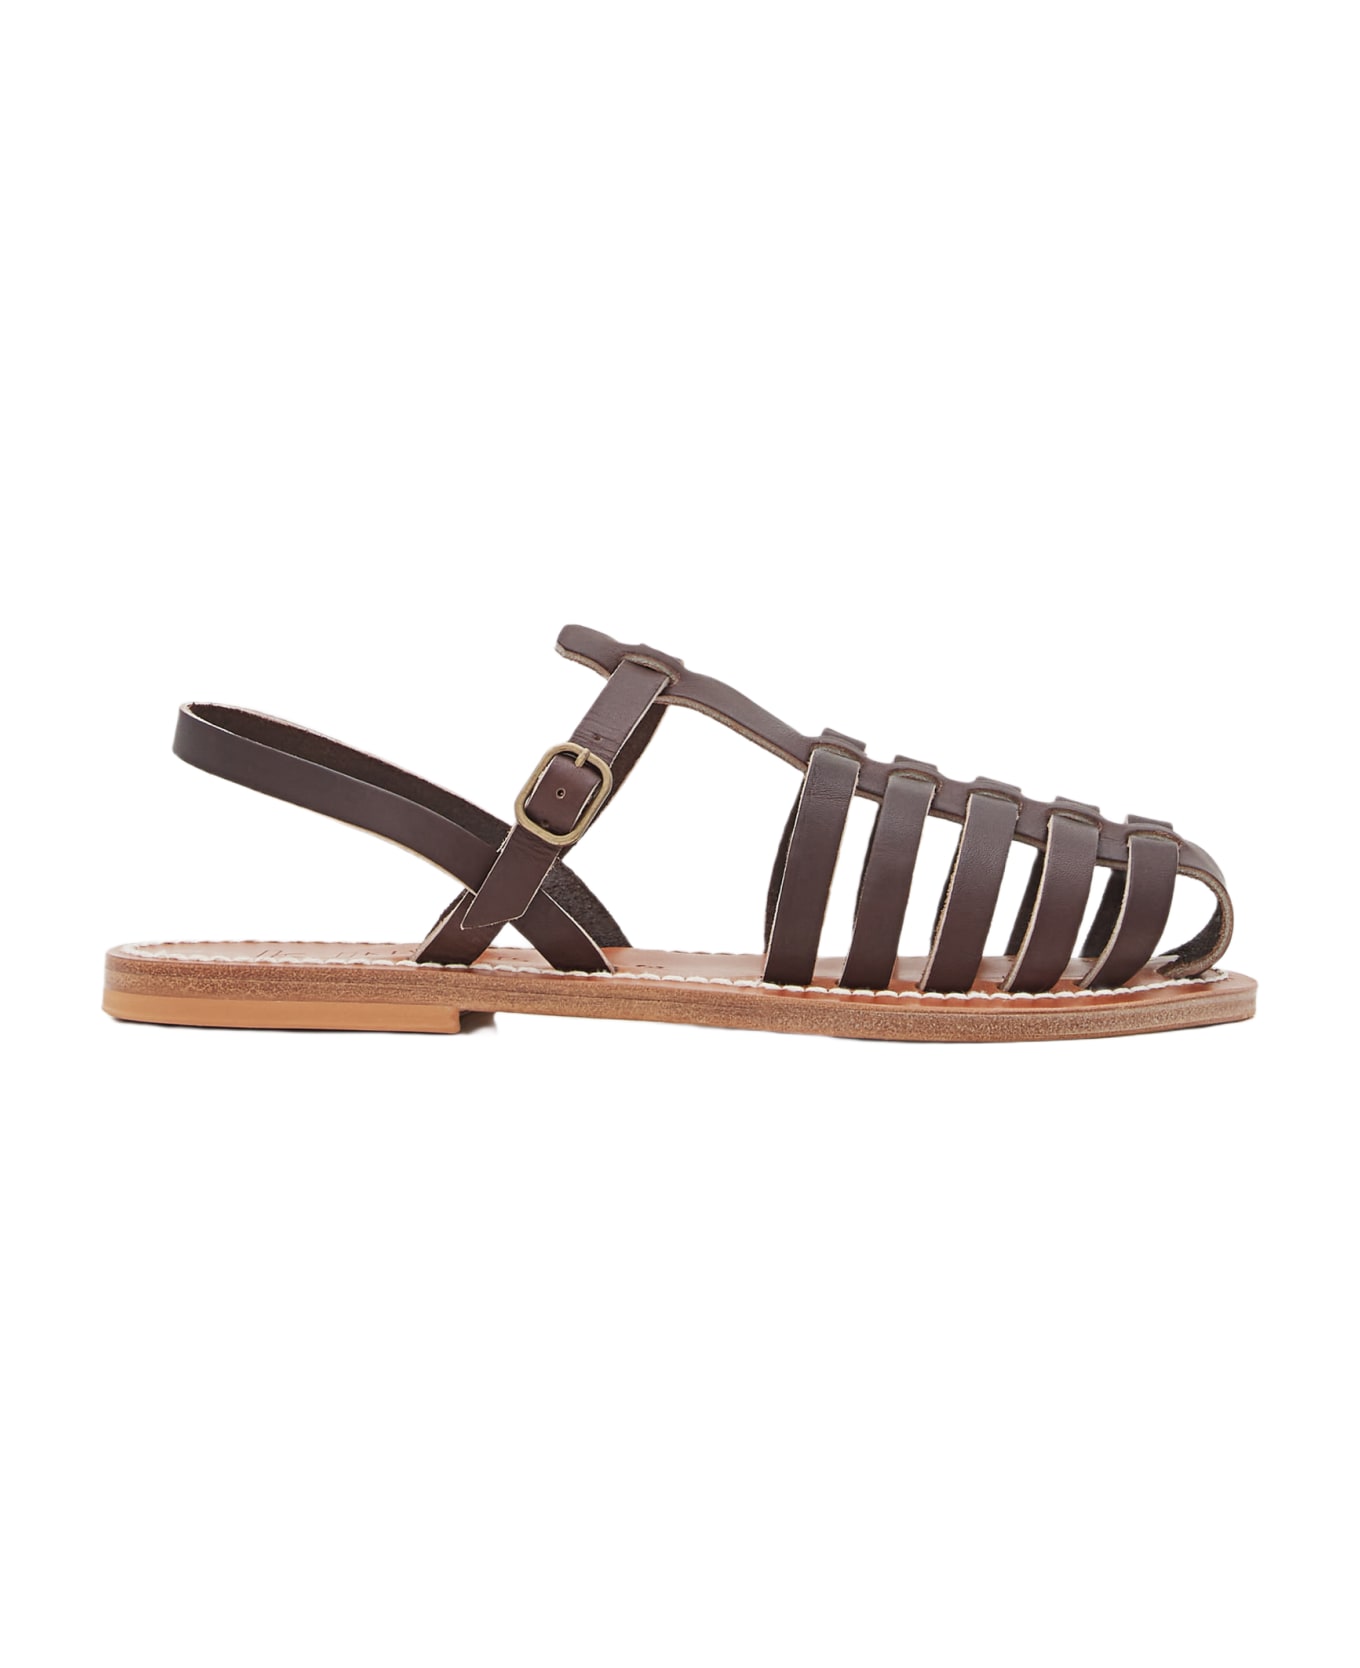 K.Jacques Adrien Leather Sandals - Brown サンダル